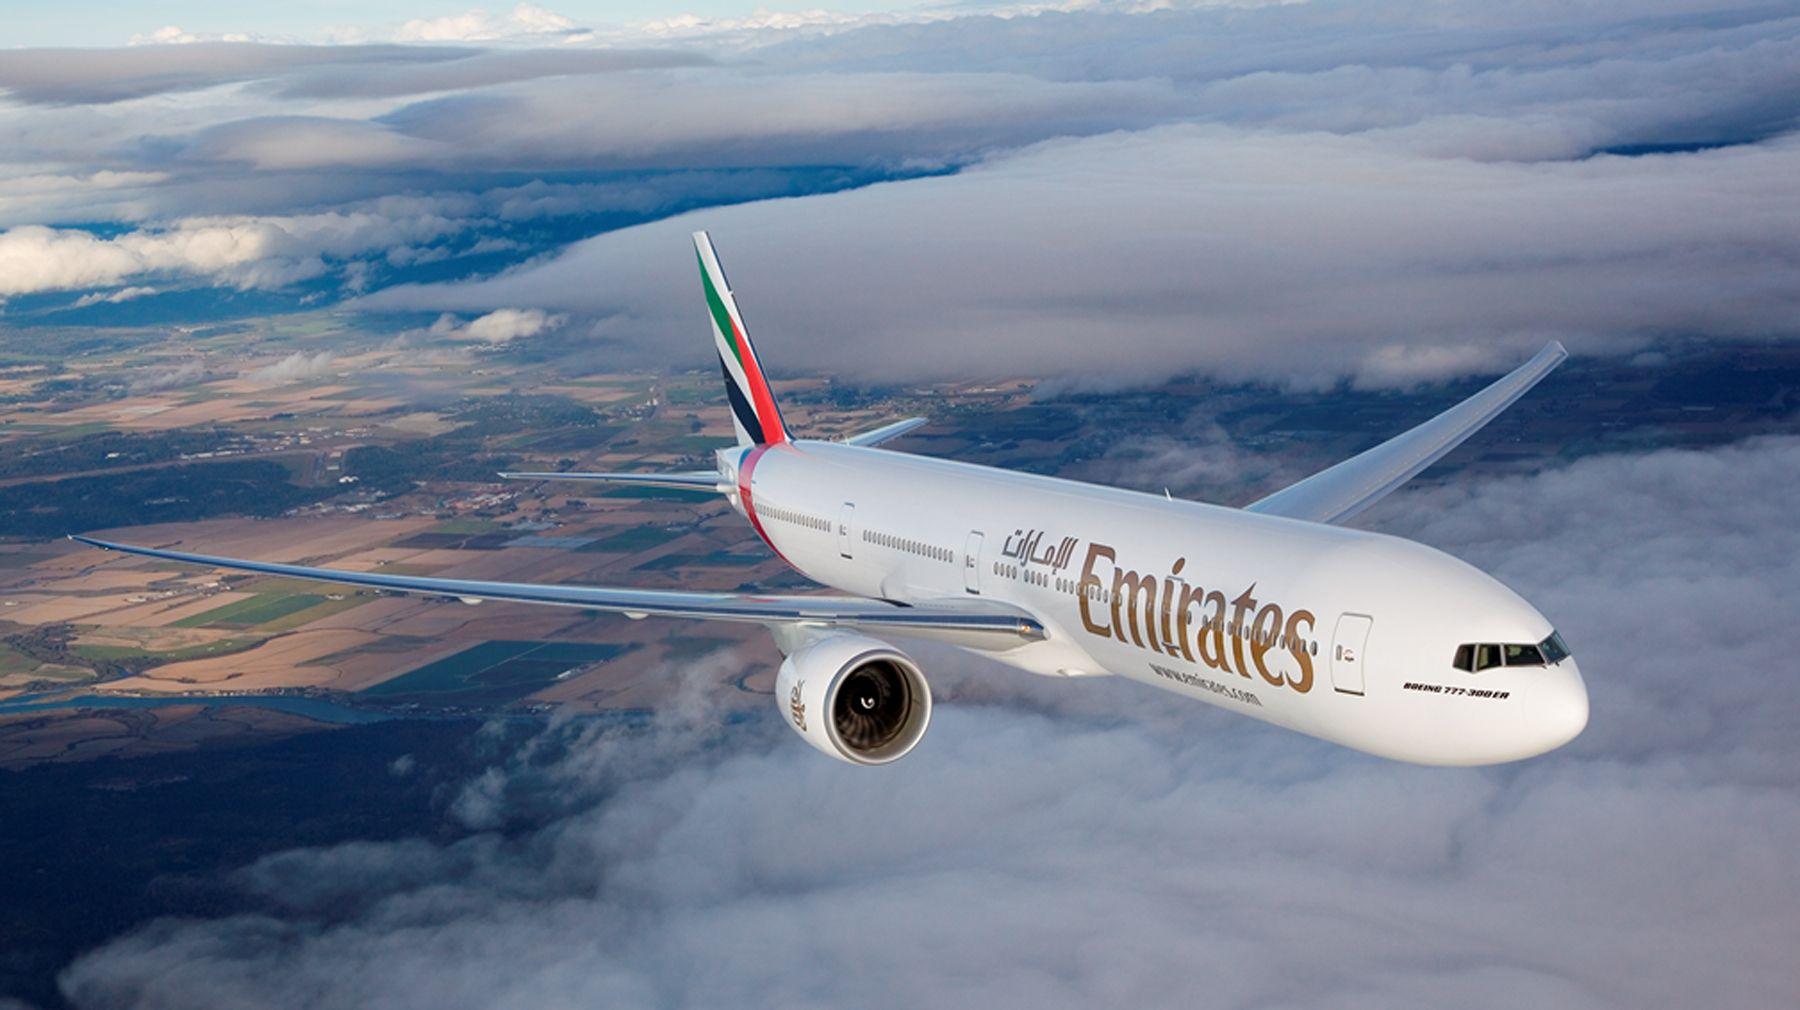 Which Are the World's Airlines of 2016?